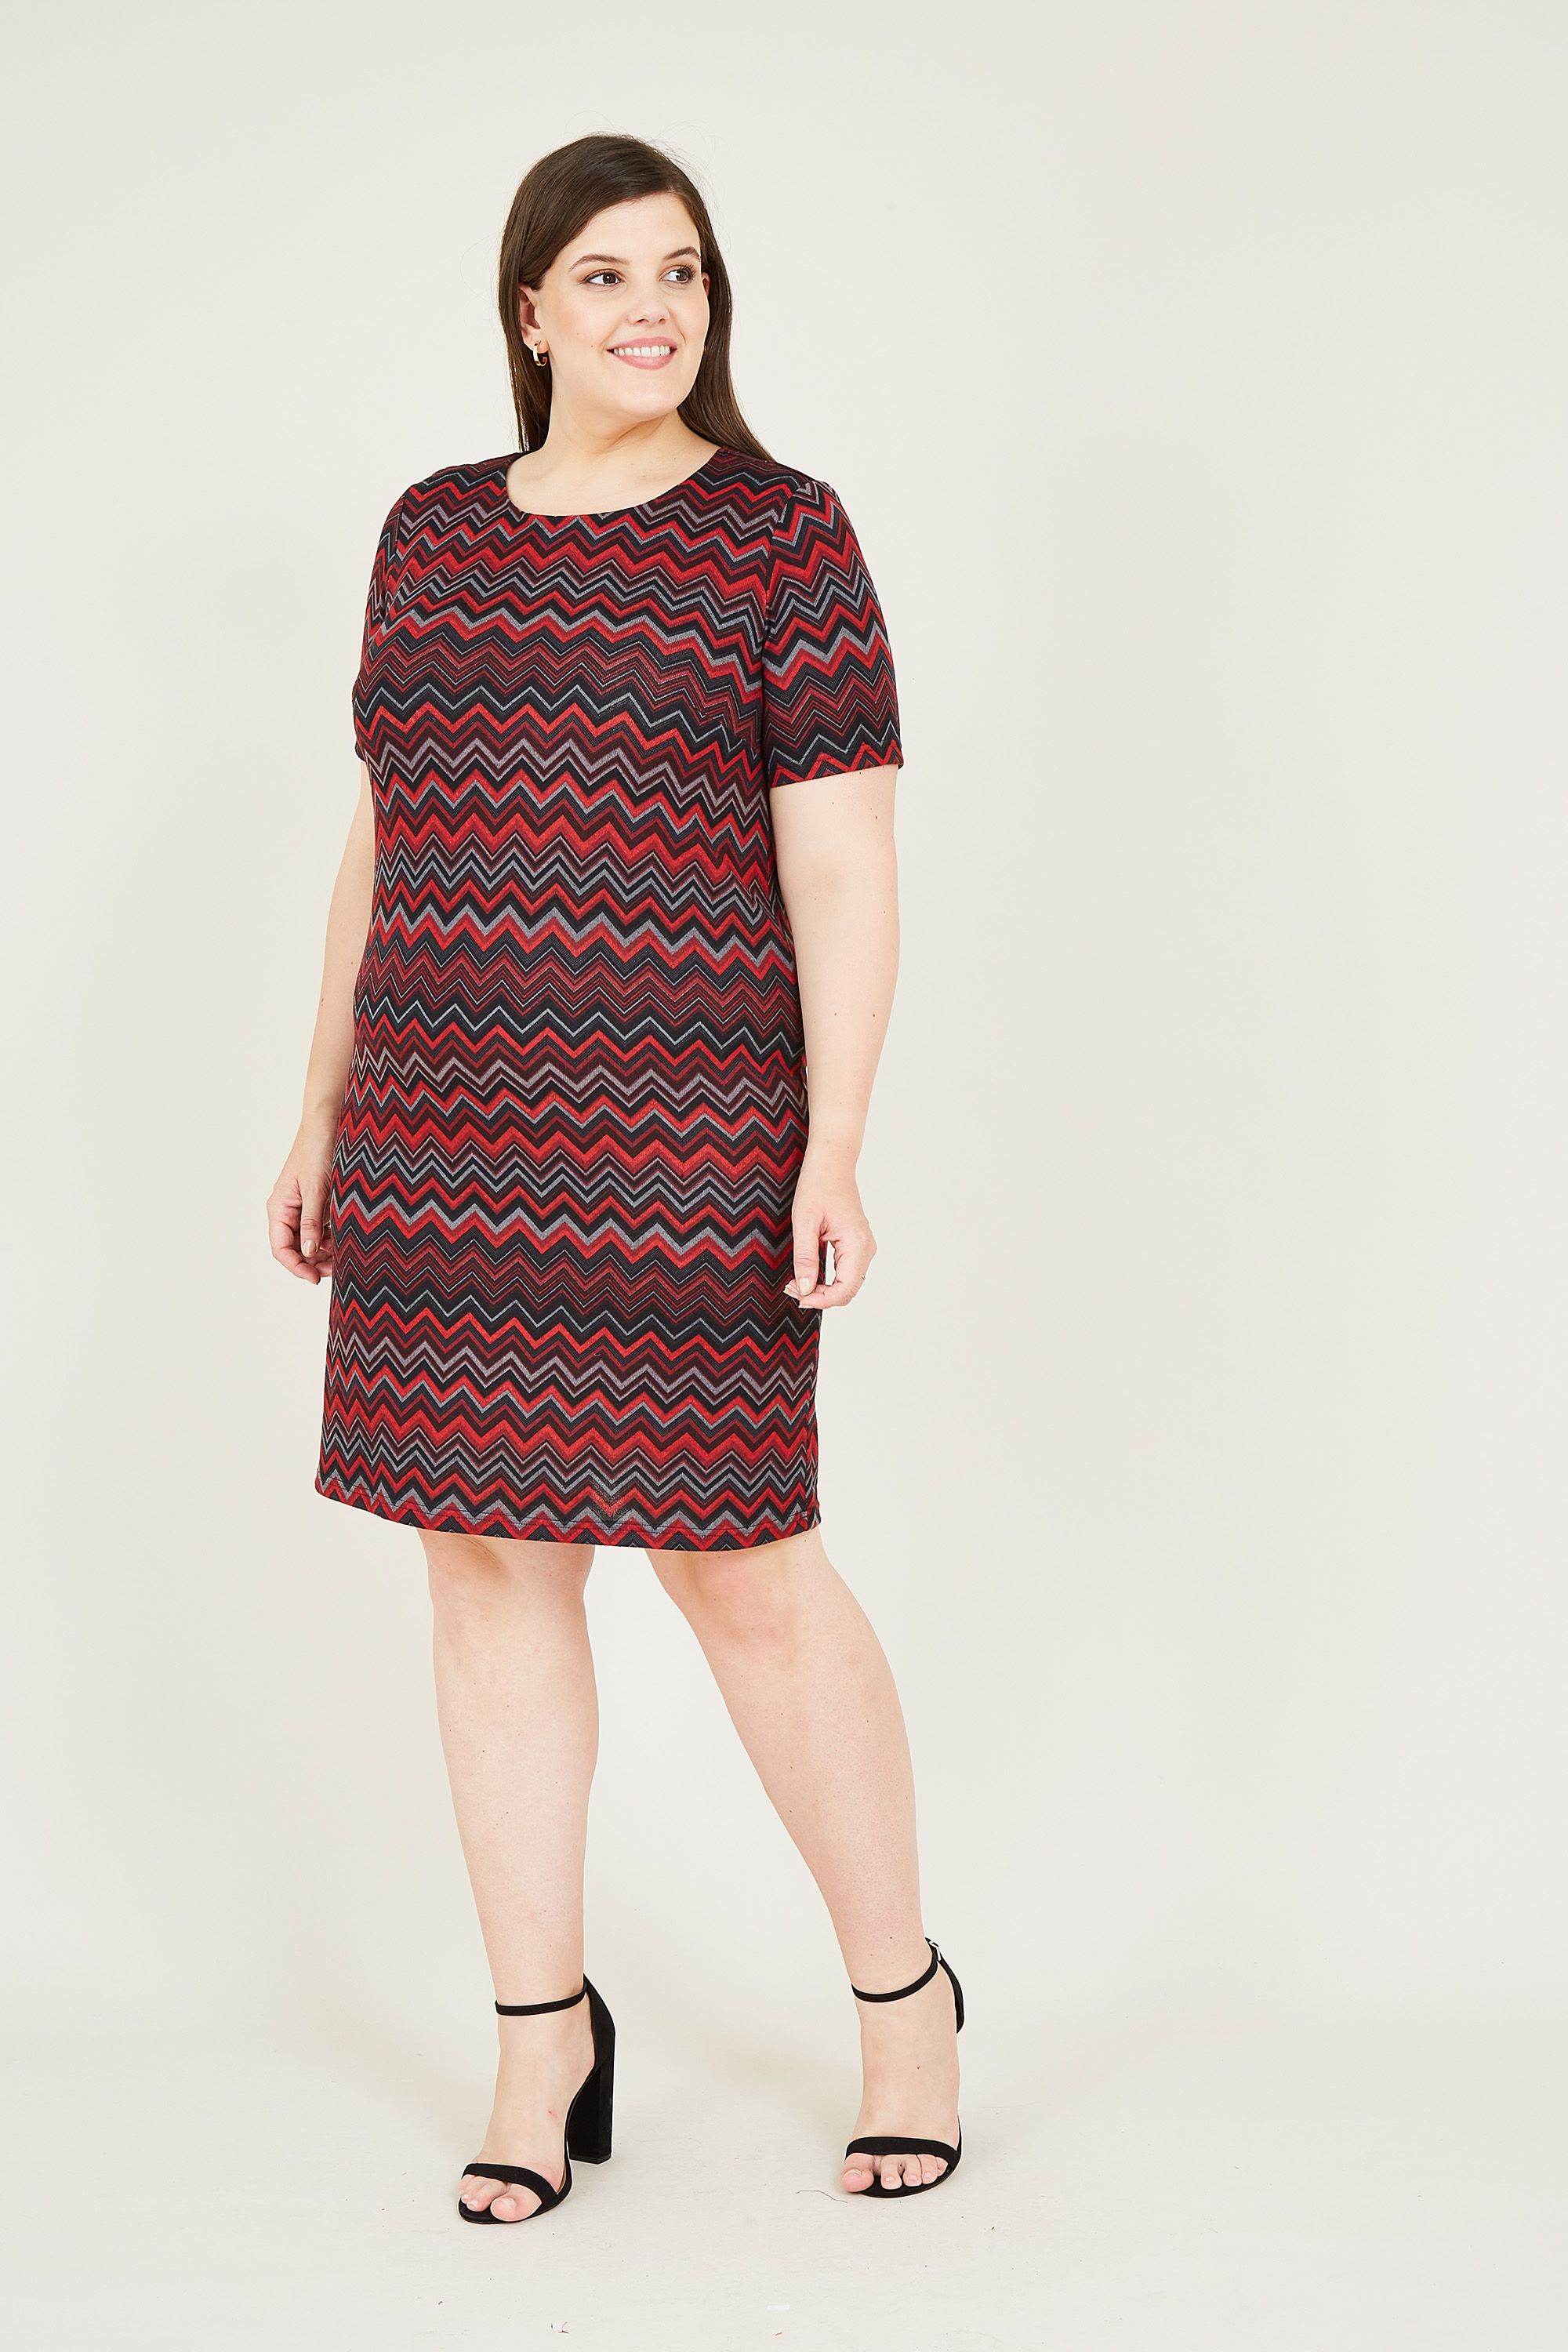 With a chic chevron print, this Mela Plus Size Chevron Tunic Dress is a bold addition to your wardrobe. Featuring a relaxed shape that sits above the knee, it's made from lightweight fabric that's perfect for all year round. Complete with a zip fastening on the back, team with strappy sandals for weekends.